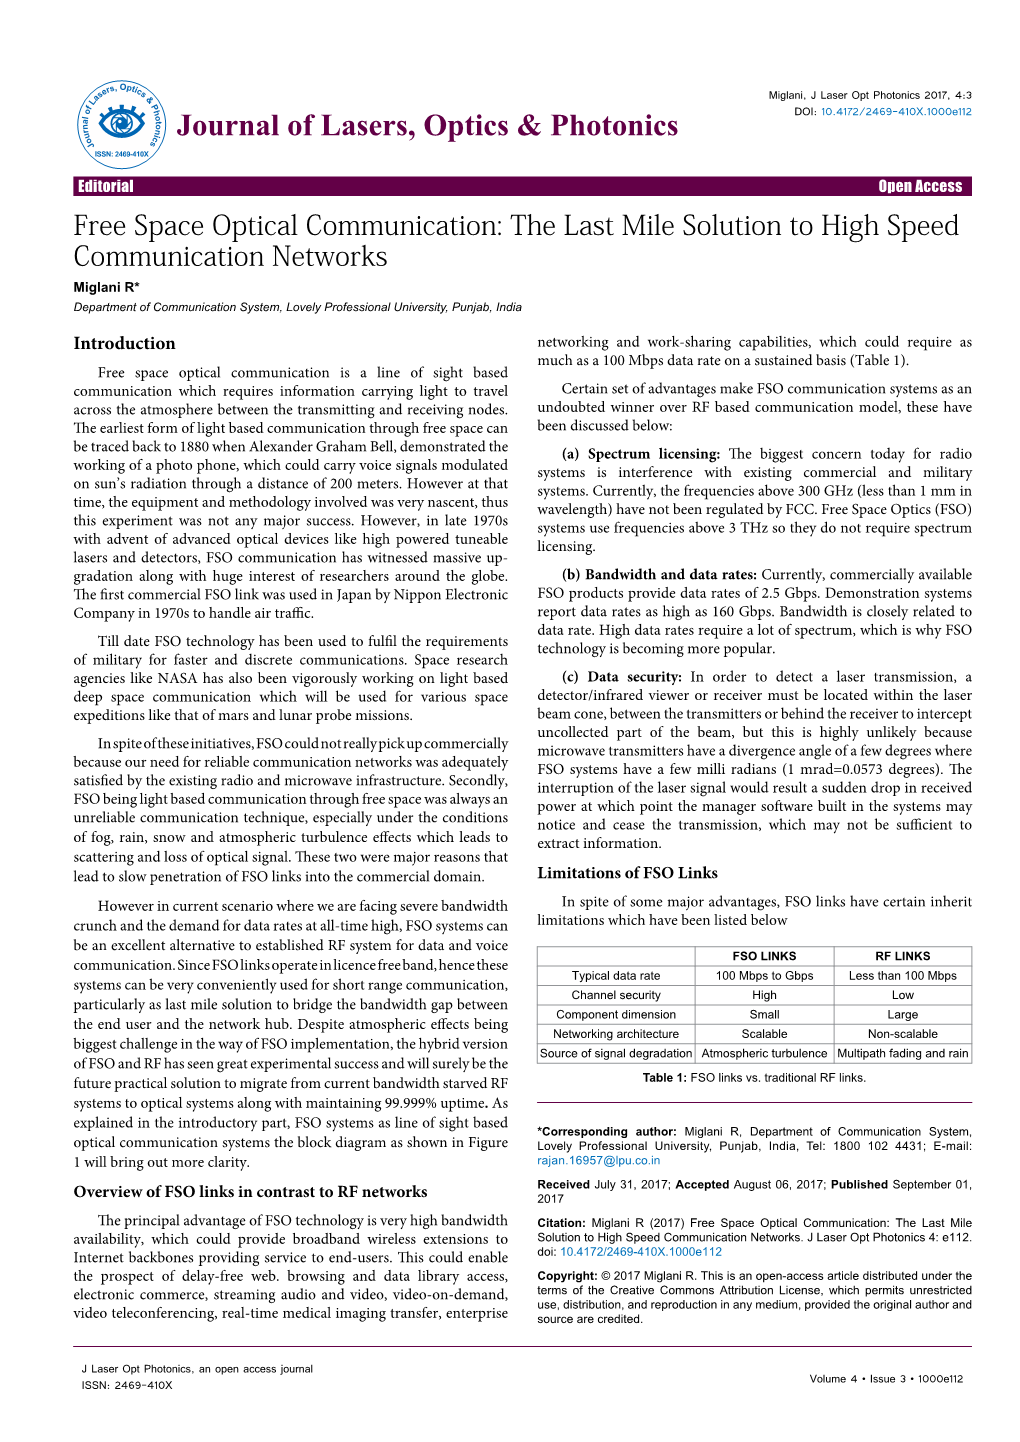 Free Space Optical Communication: the Last Mile Solution to High Speed Communication Networks